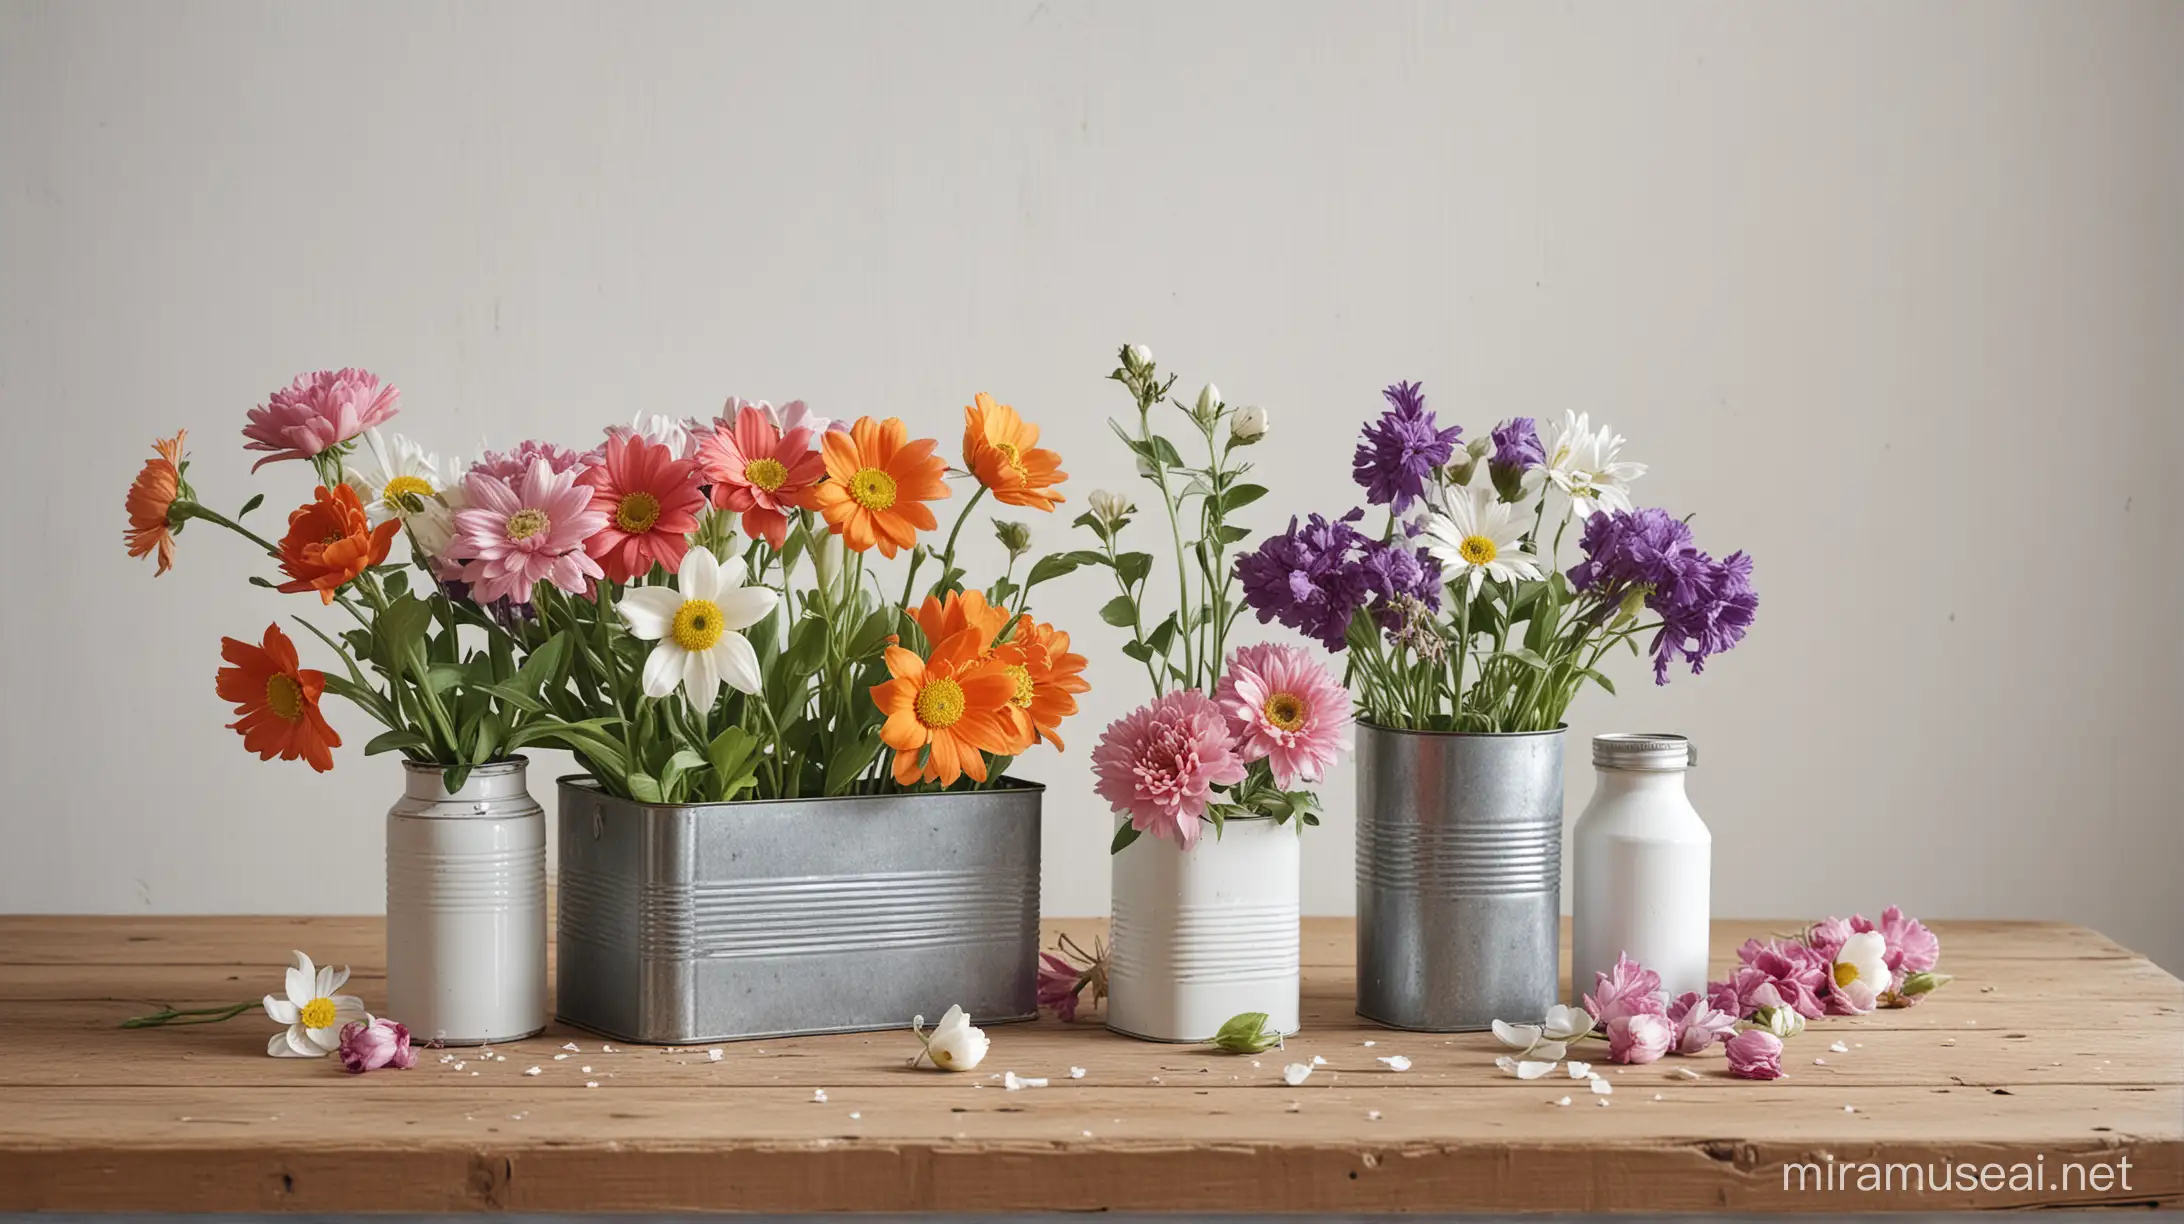 generate me a 1920px by 1080px wallpaper of fresh flowers in an egg carton and another set of flowers in an old can food tin can, set on a wooden table with a clean white painted wall. keep the image realistic 